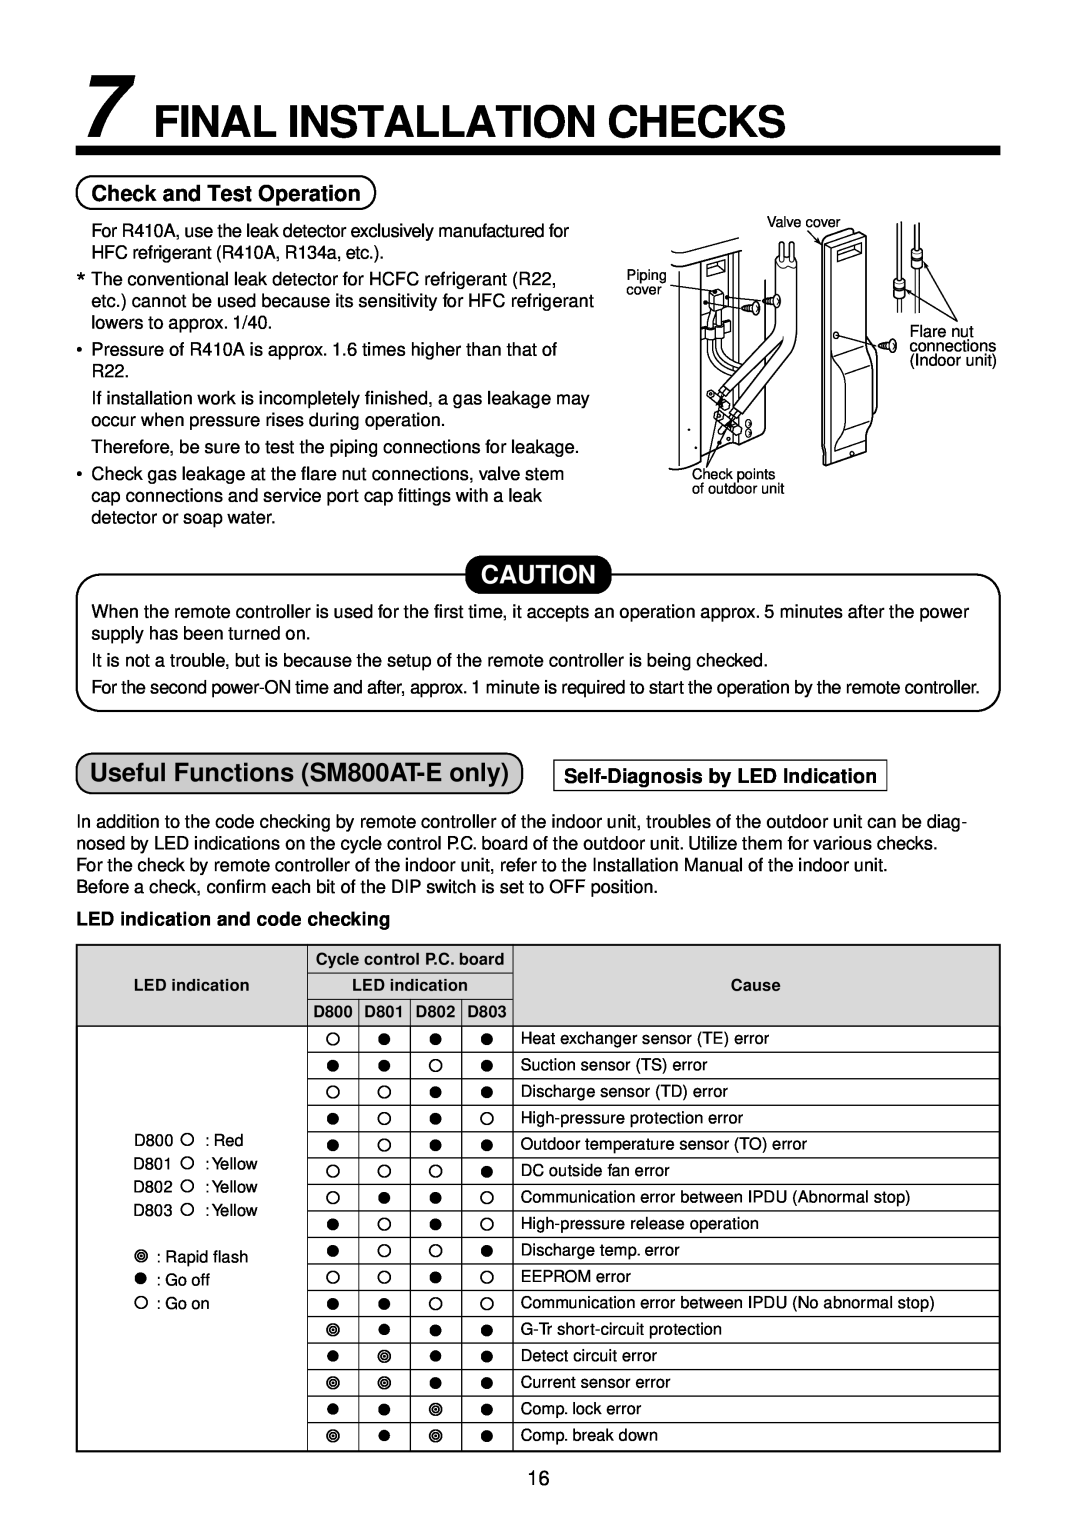 Toshiba R410A service manual Final Installation Checks, Useful Functions SM800AT-Eonly, Check and Test Operation 